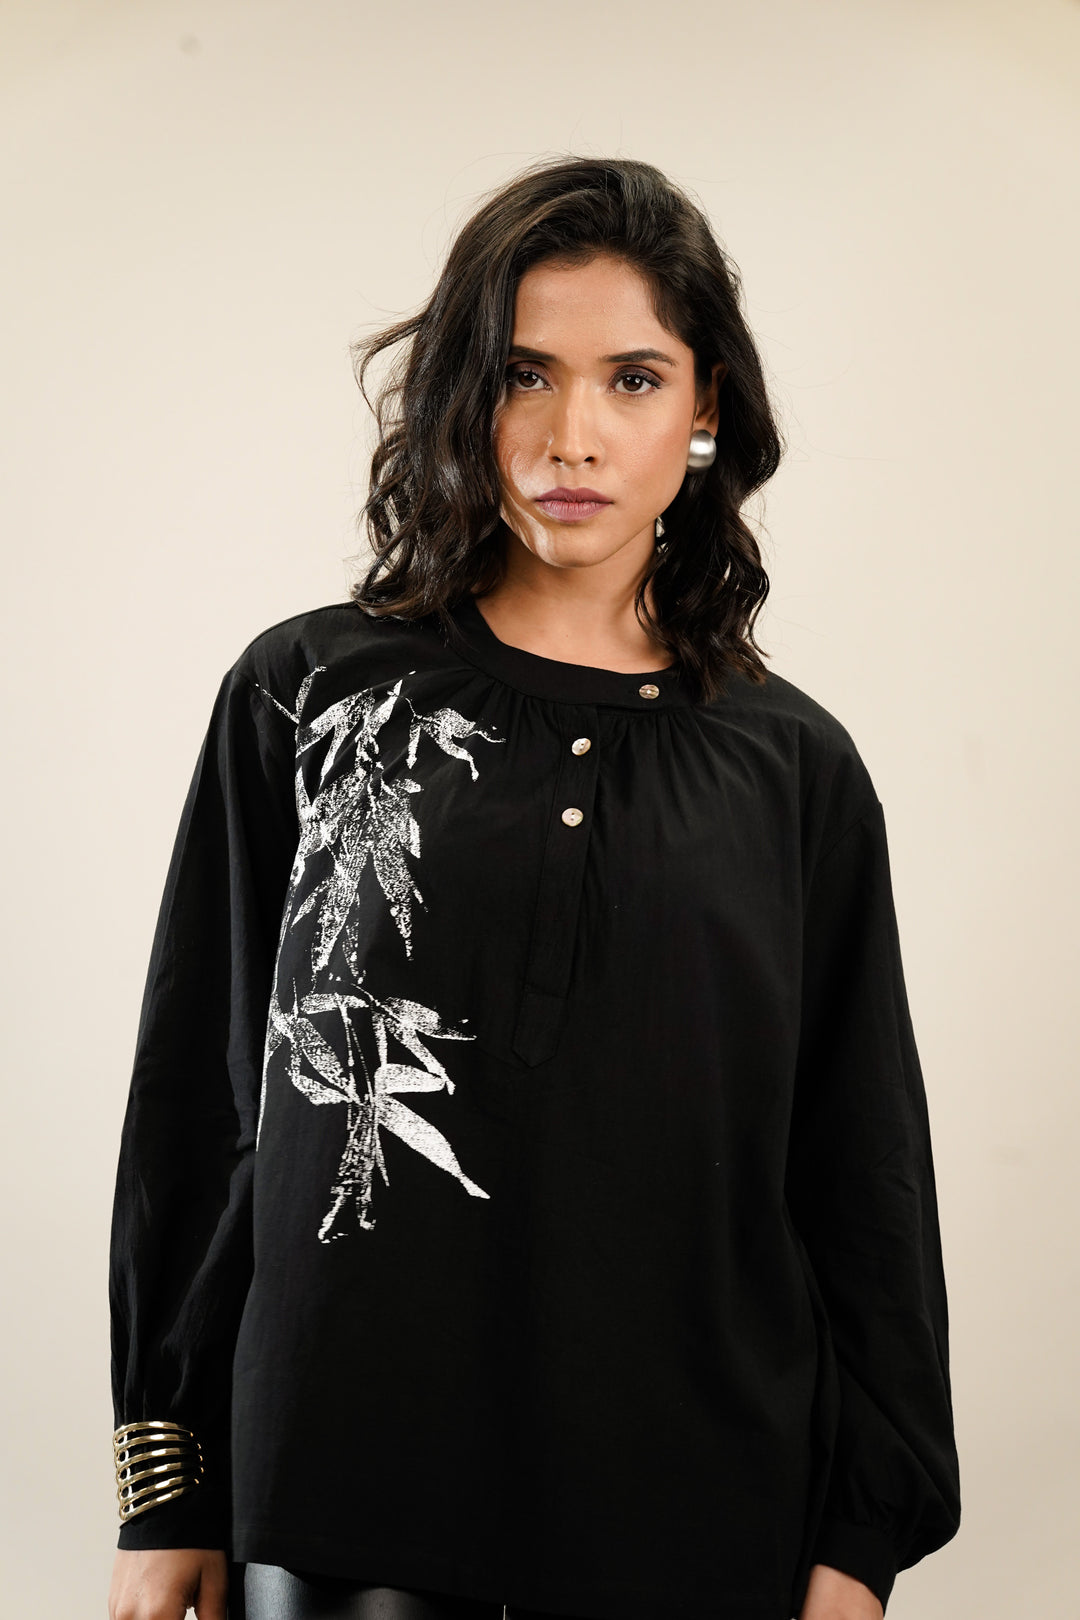 Stylish black cotton top with bamboo print